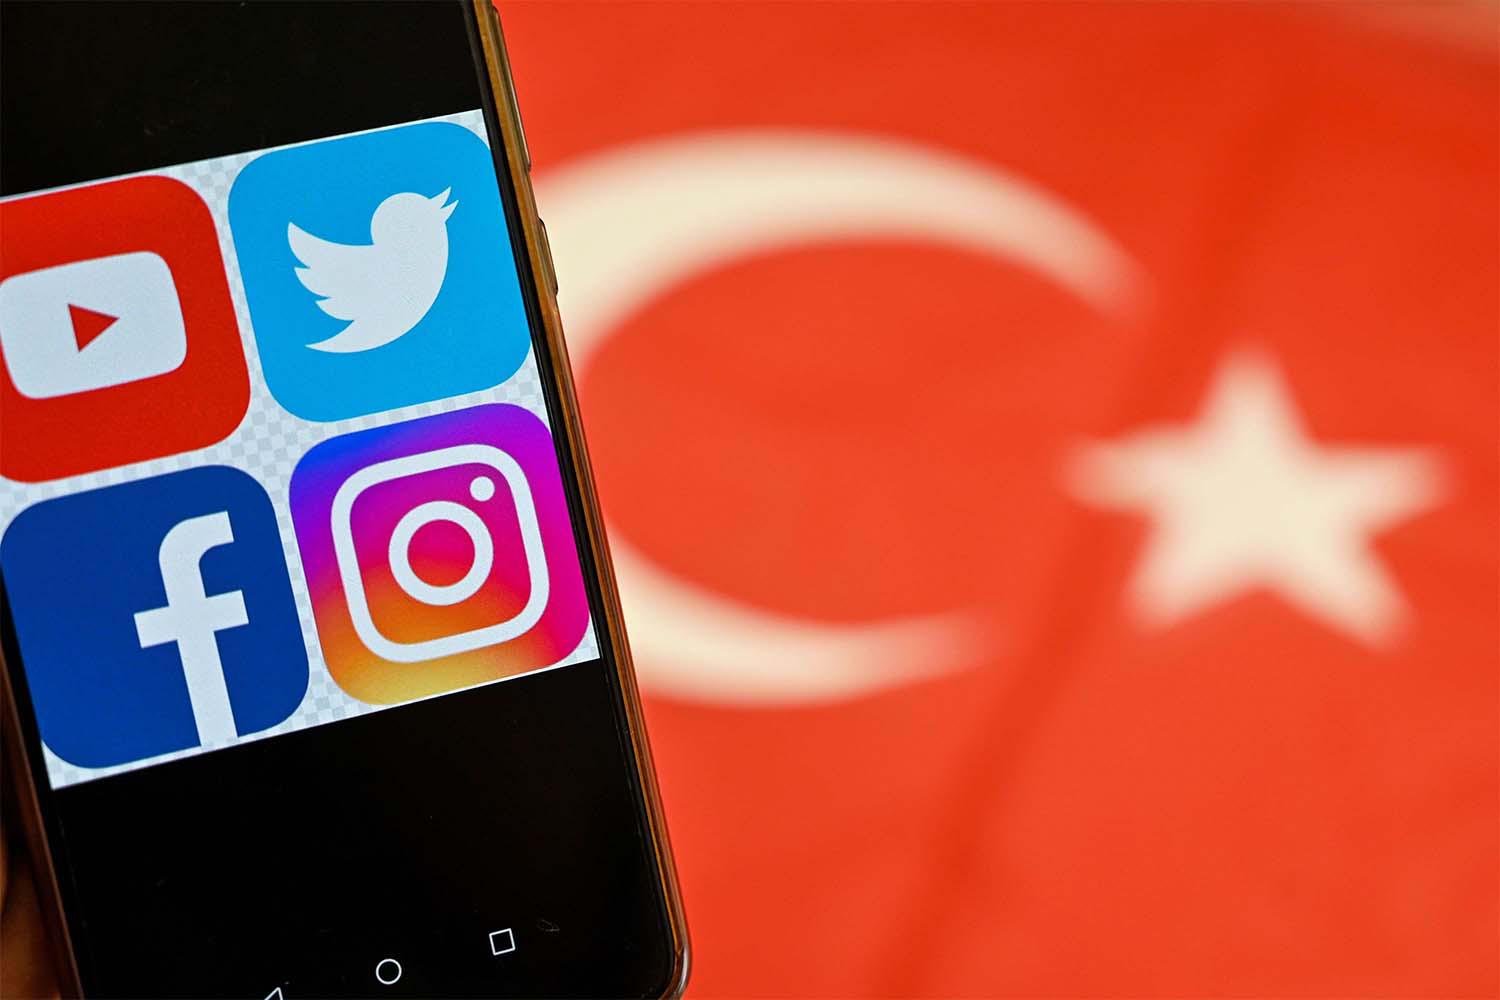 Turkish government's crackdown on freedom of expression continues unabated